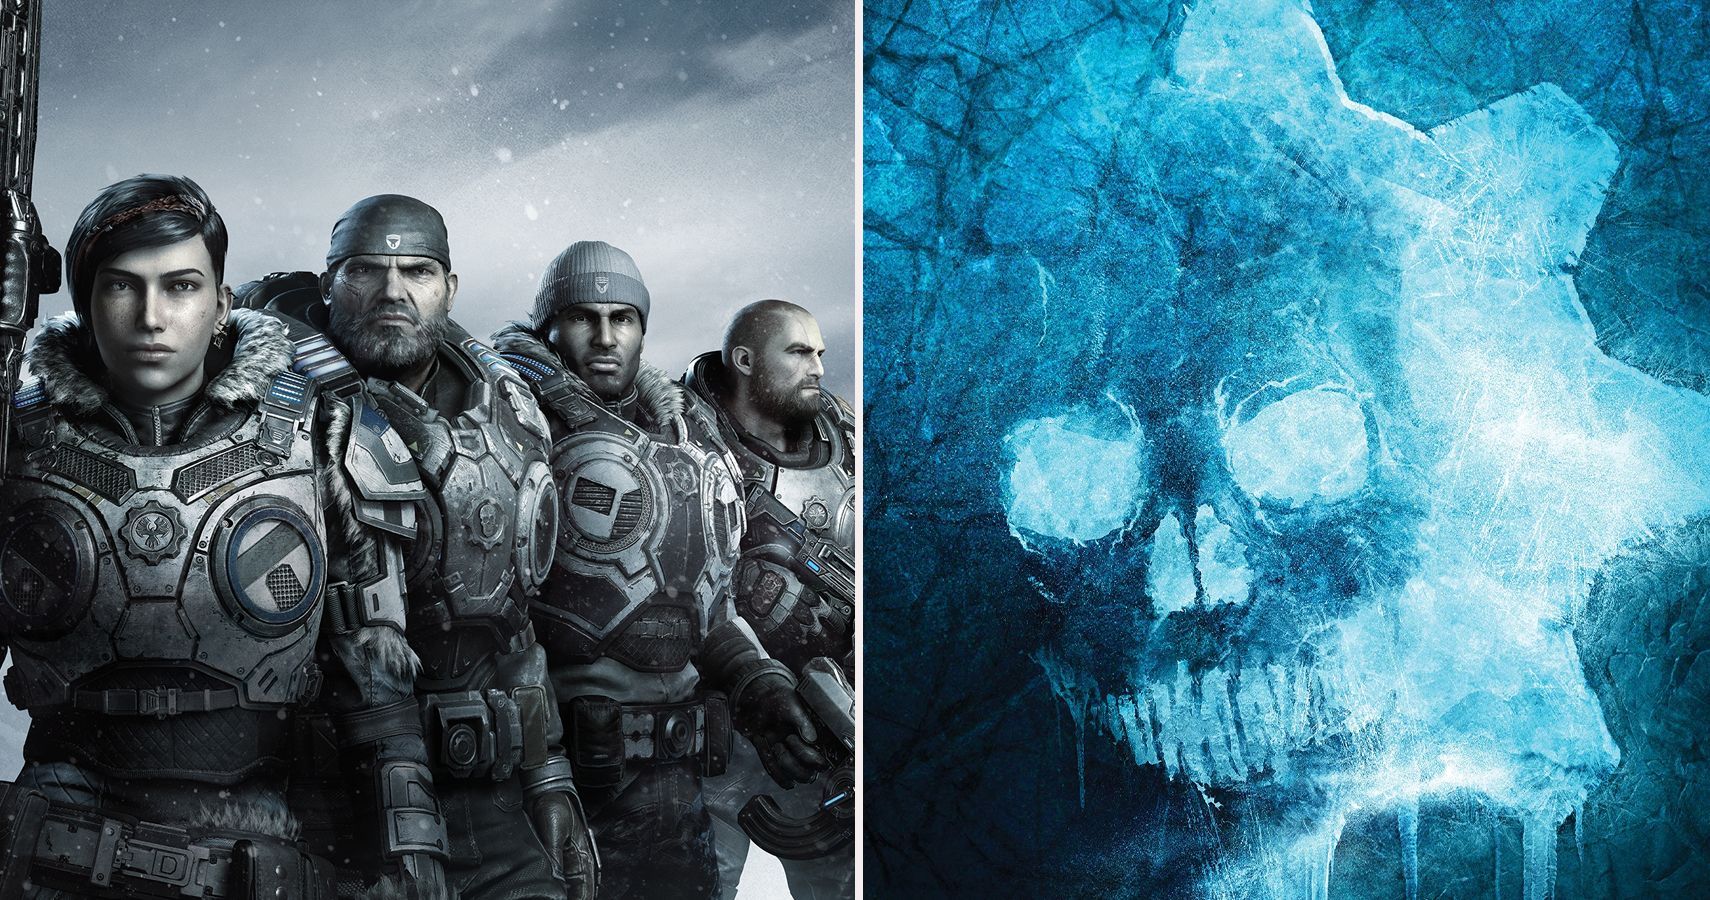 First Impressions: Gears 5 Looks Fantastic but Feels Off